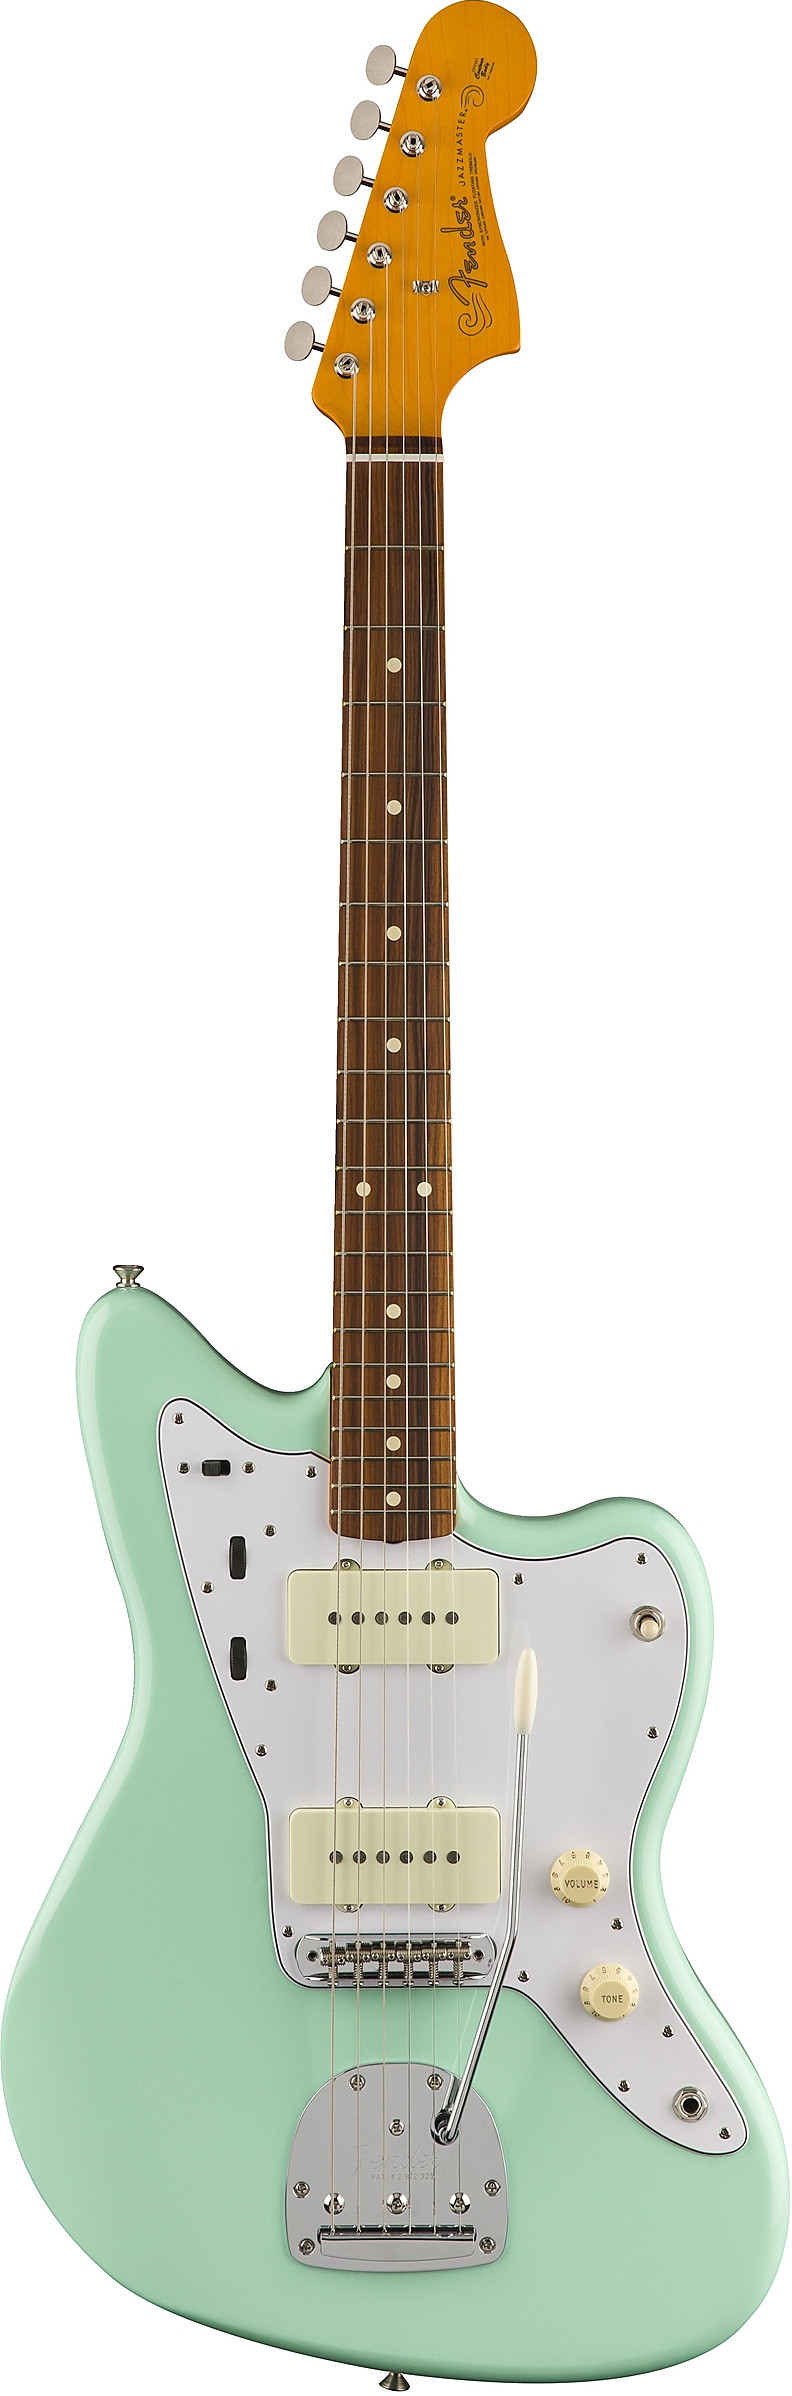 60s Jazzmaster Lacquer by Fender